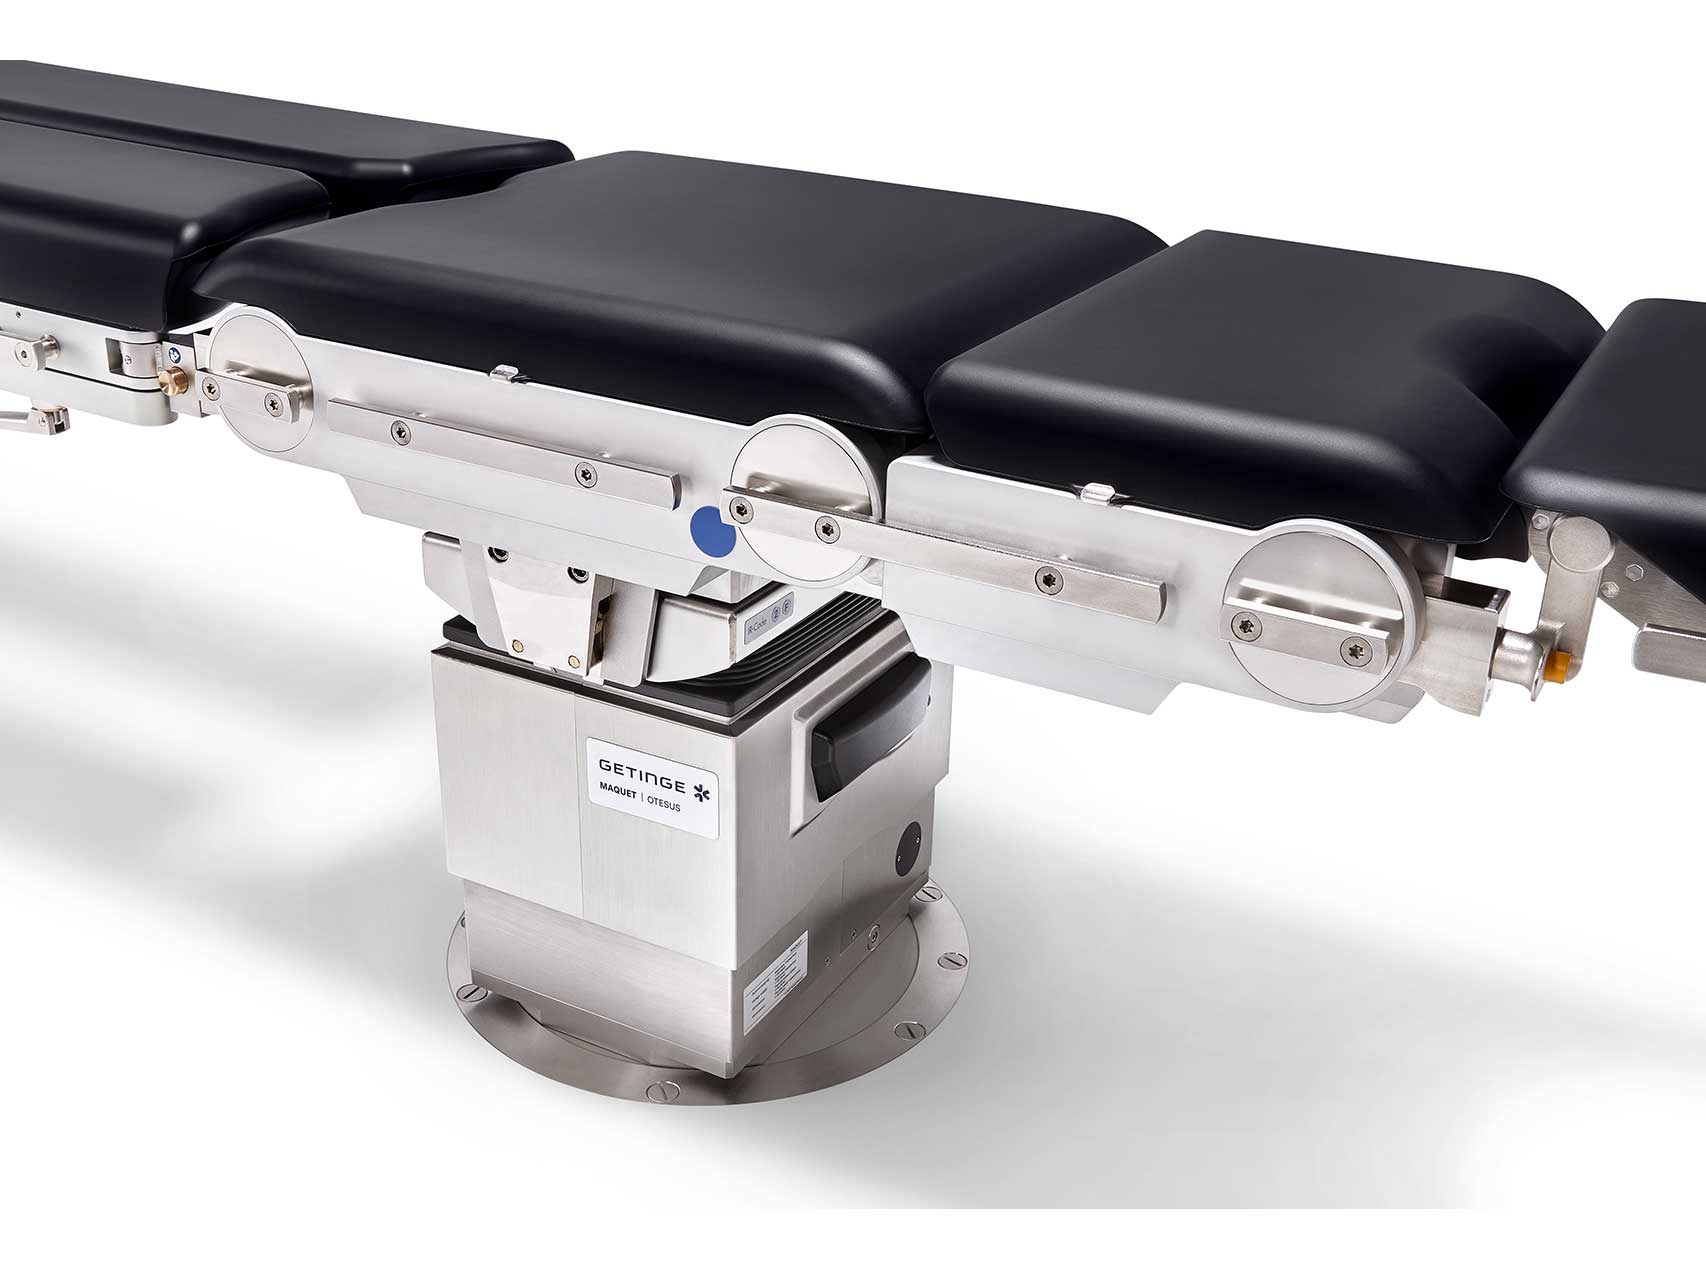 Maquet Otesus expands patient positioning possibilities to keep patients safe and improve comfort for surgical staff during procedures.